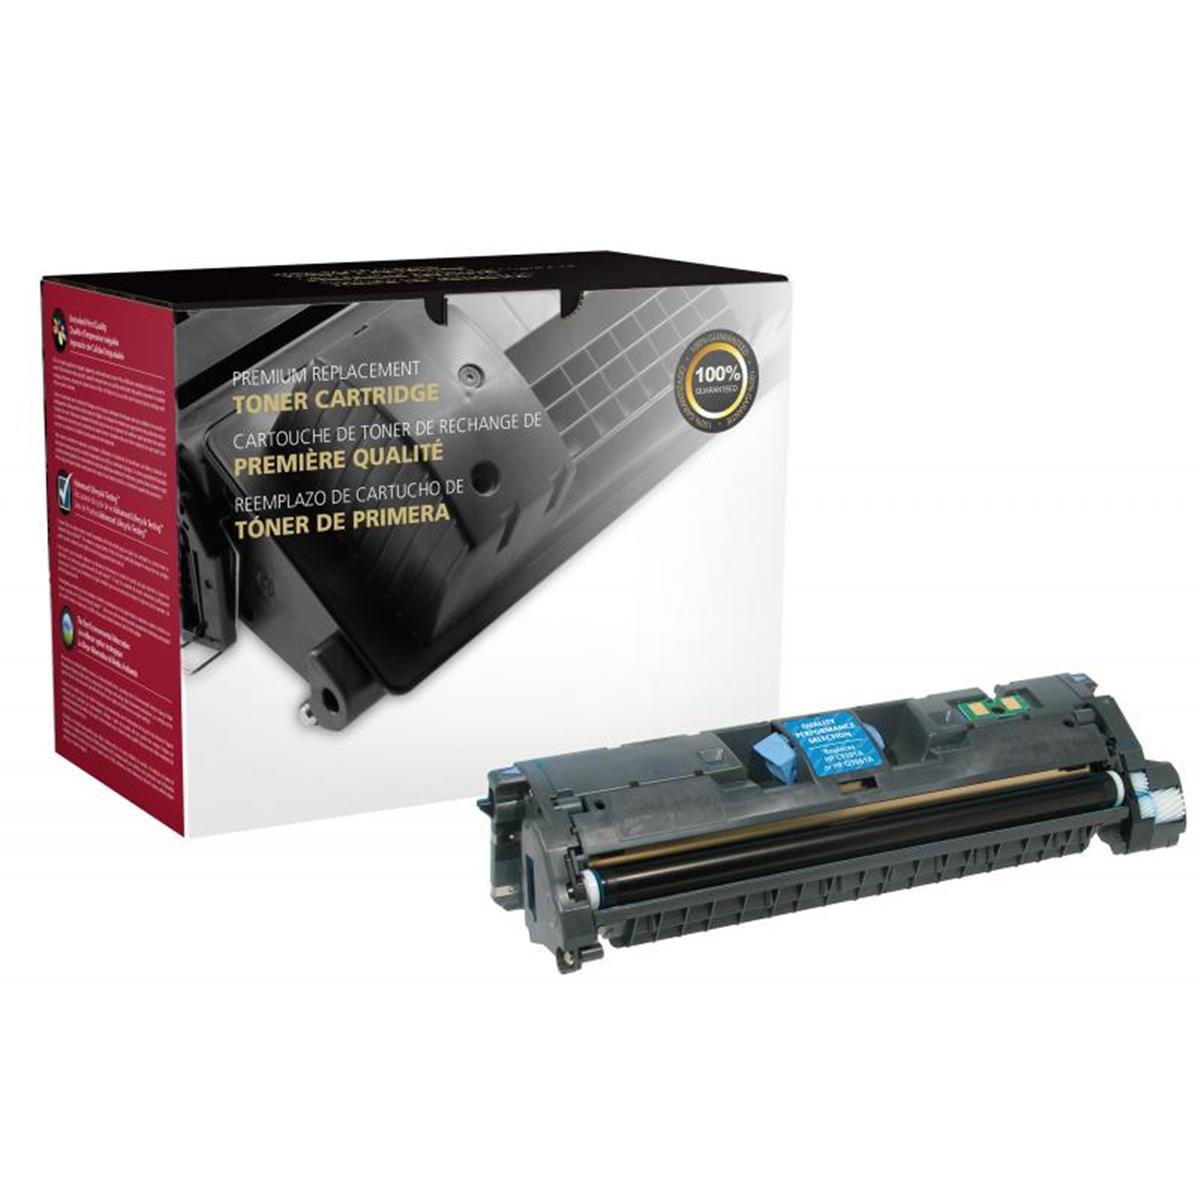 Picture of 114025 Cyan Toner Cartridge for C9701A & Q3961A